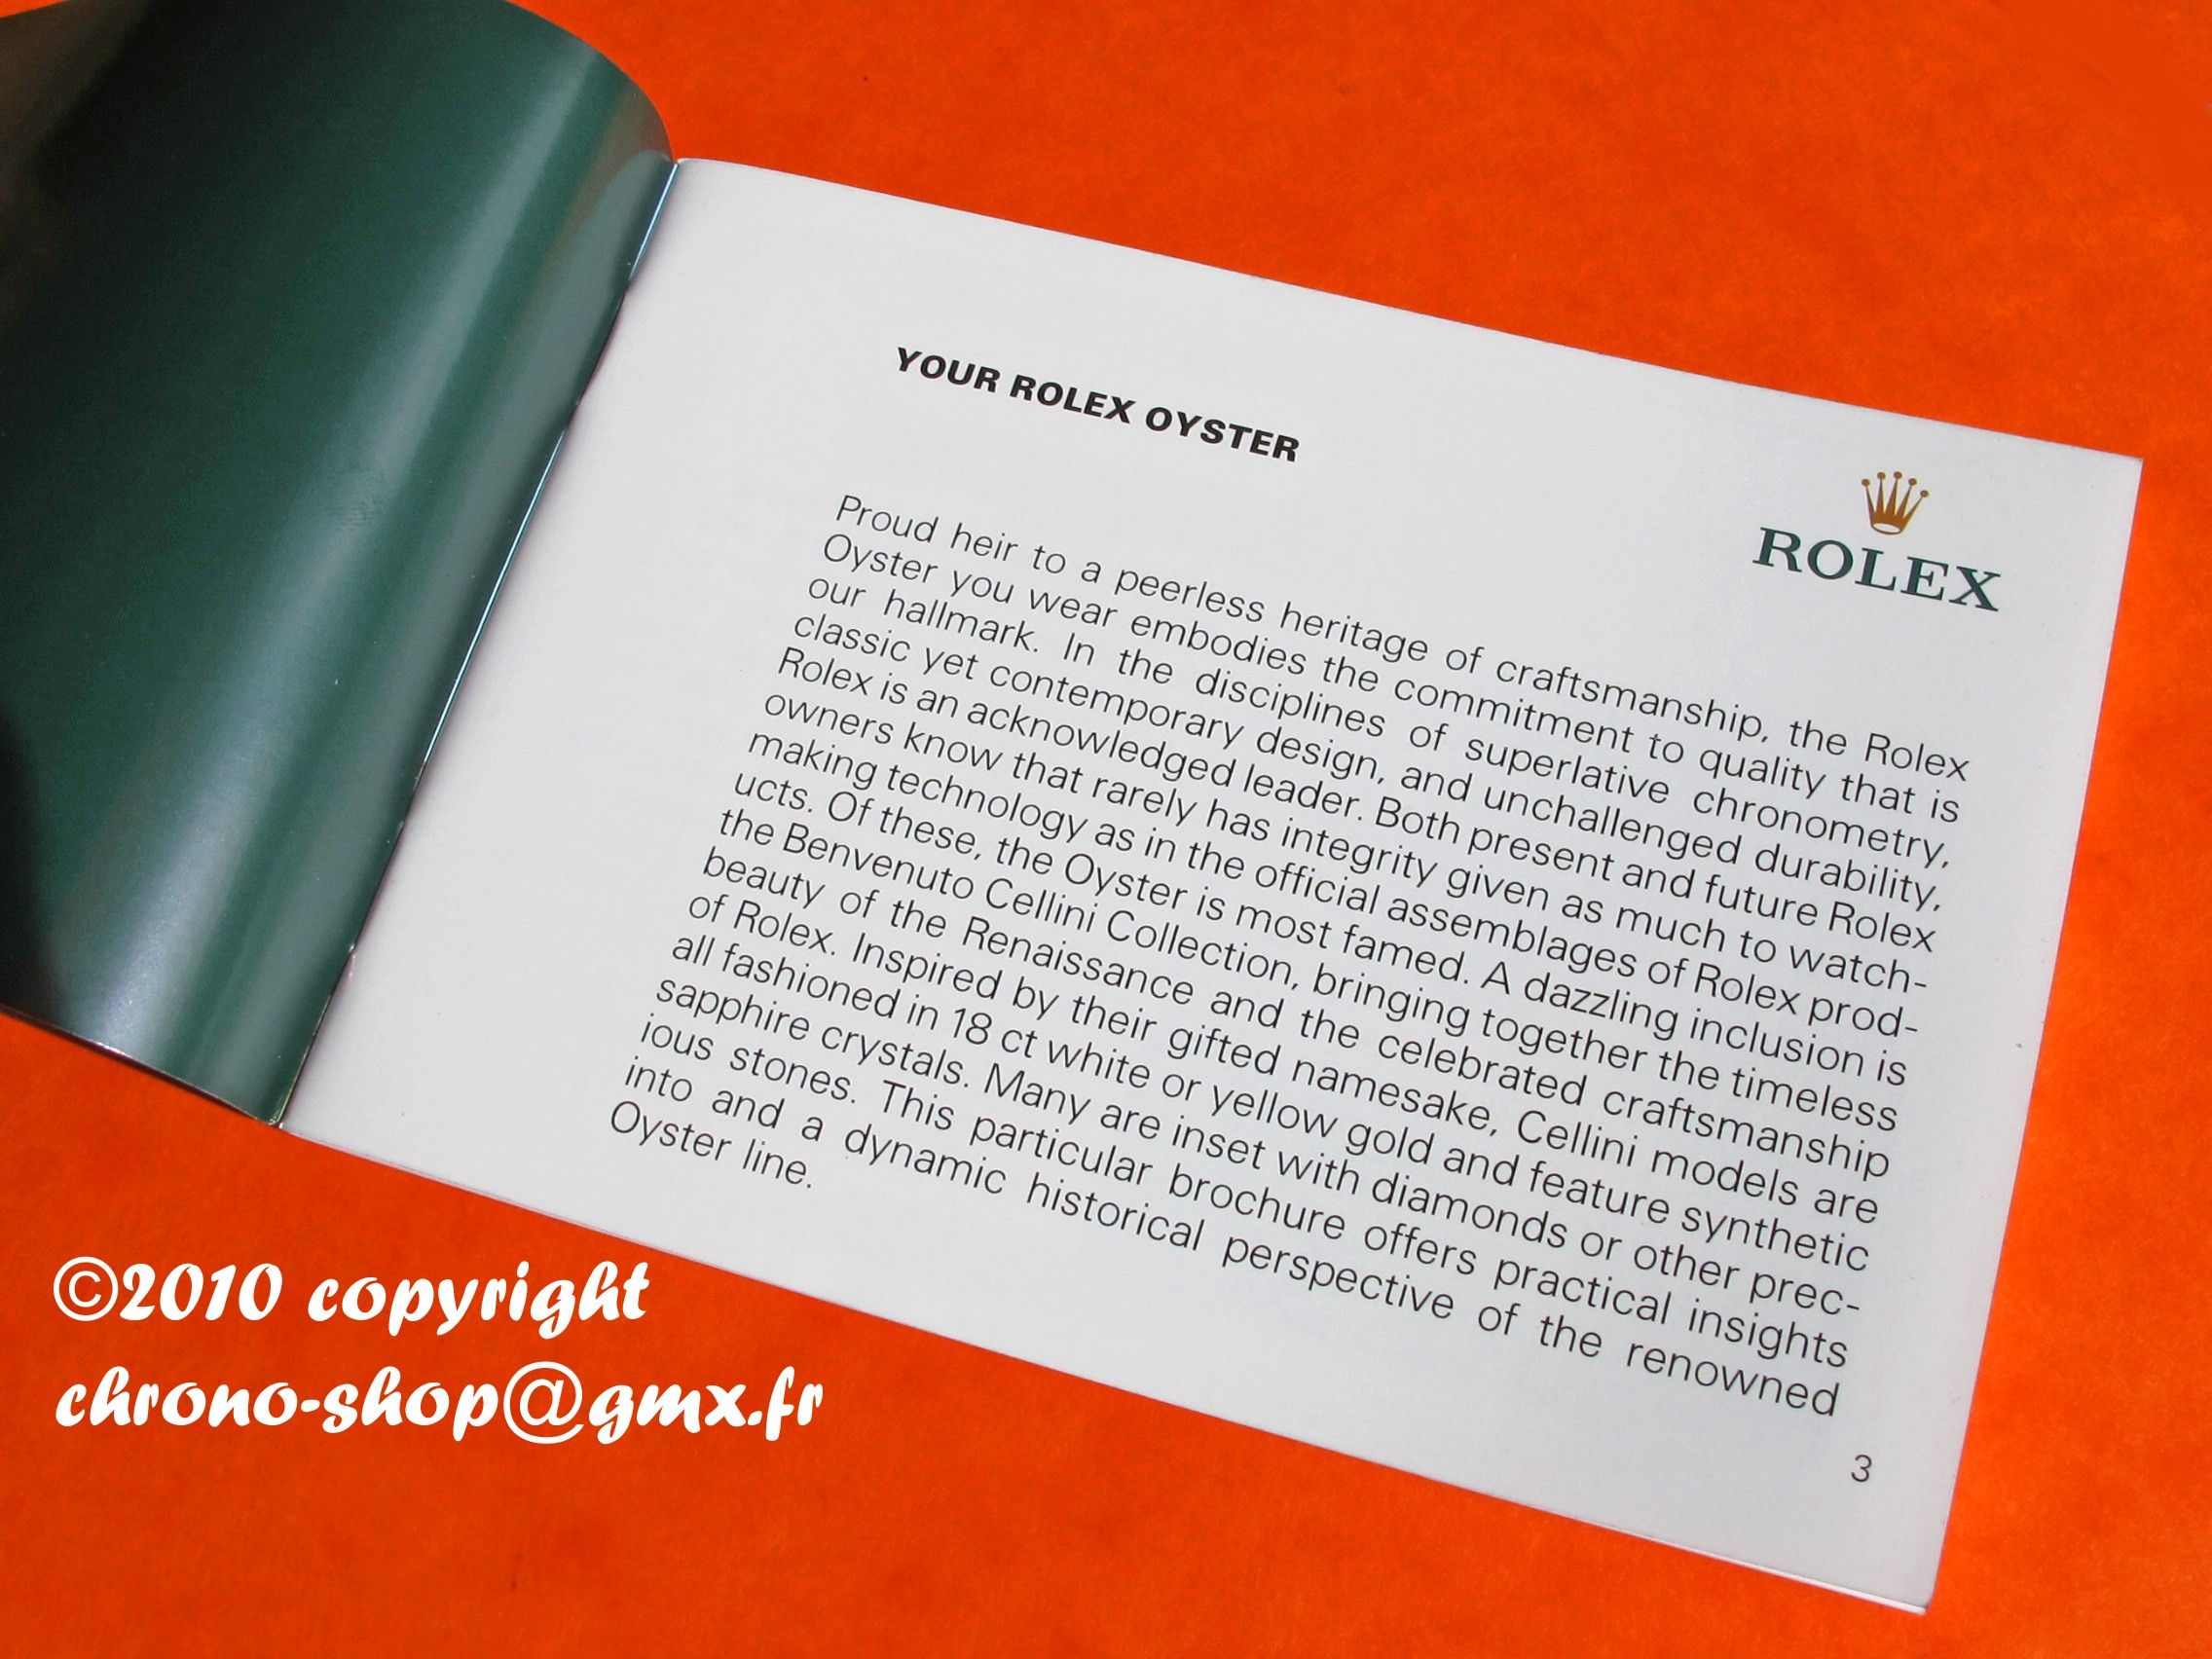 ROLEX OYSTER BOOKLET